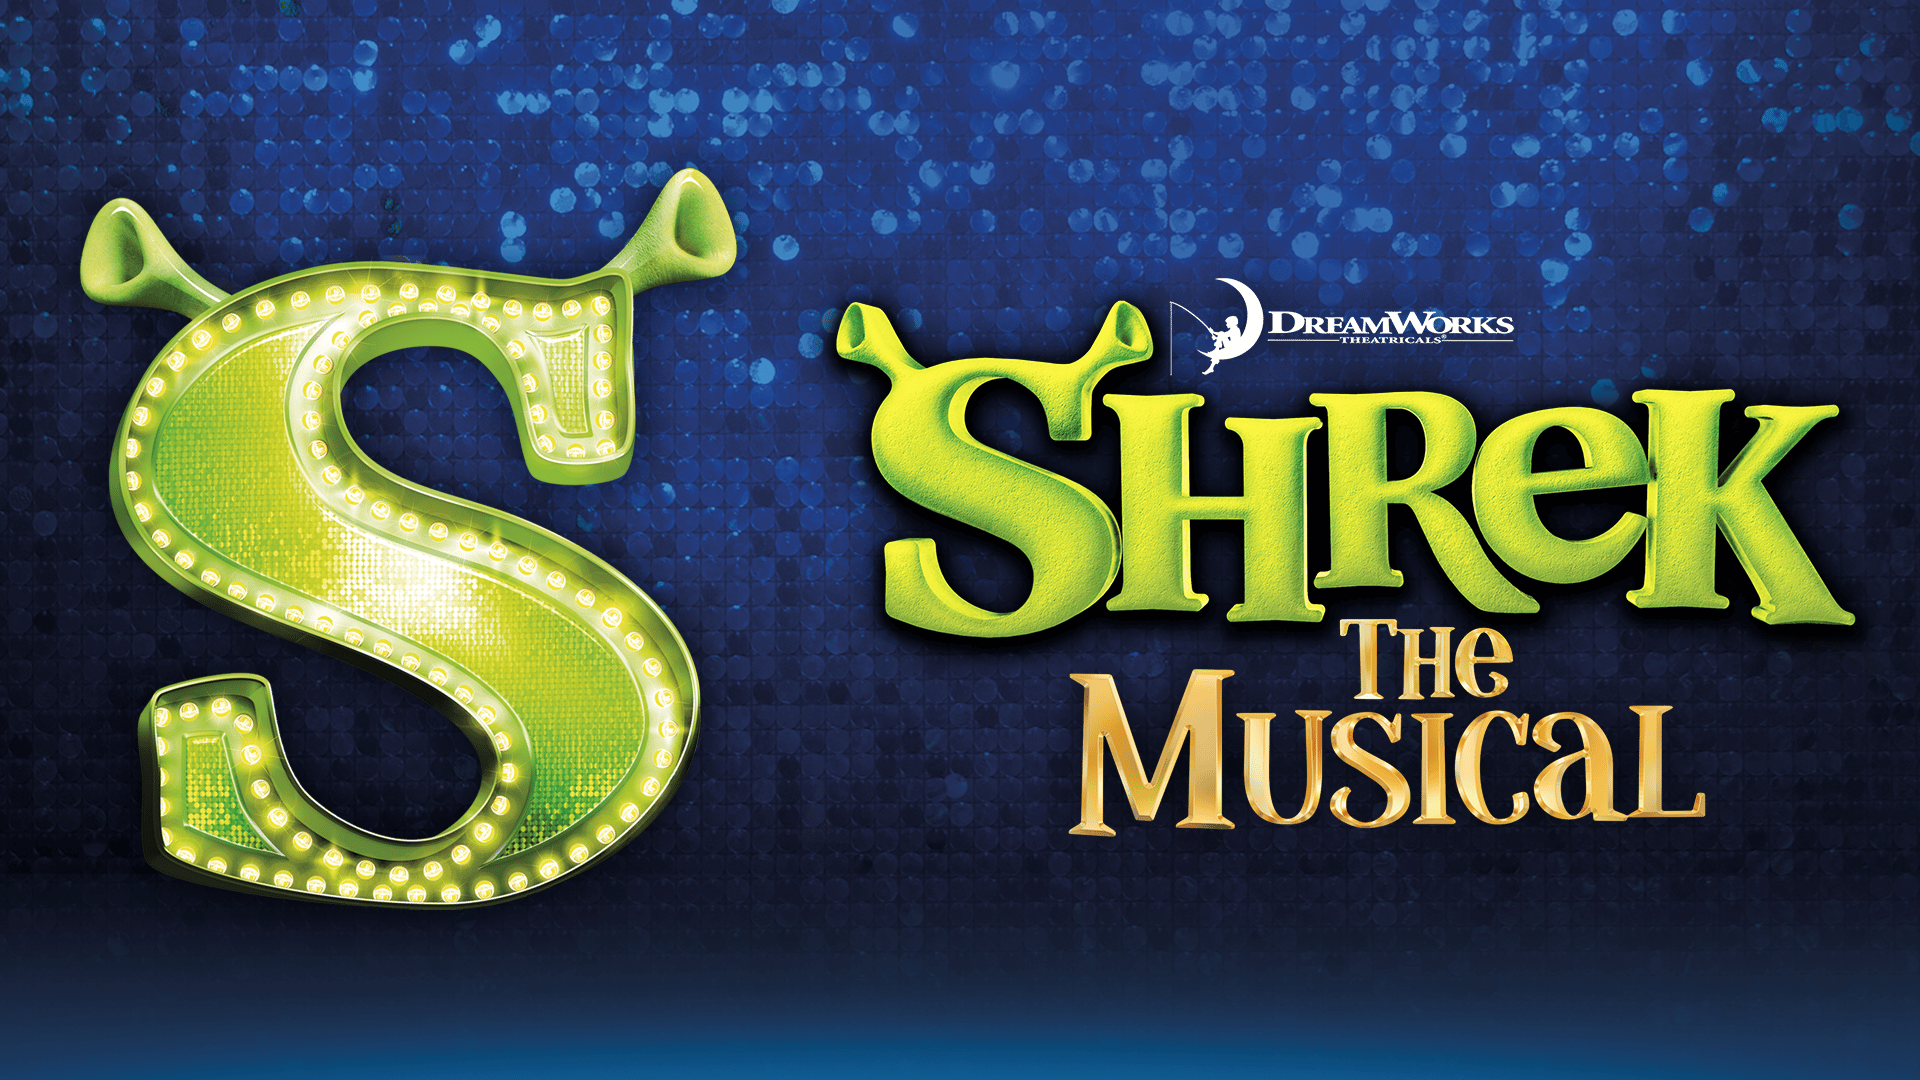 Shrek the Musical artwork – A large green ‘S’ with Shrek’s ears on top, beside text reading: ‘Dreamworks Theatricals. Shrek The Musical’. Blue sequin background.